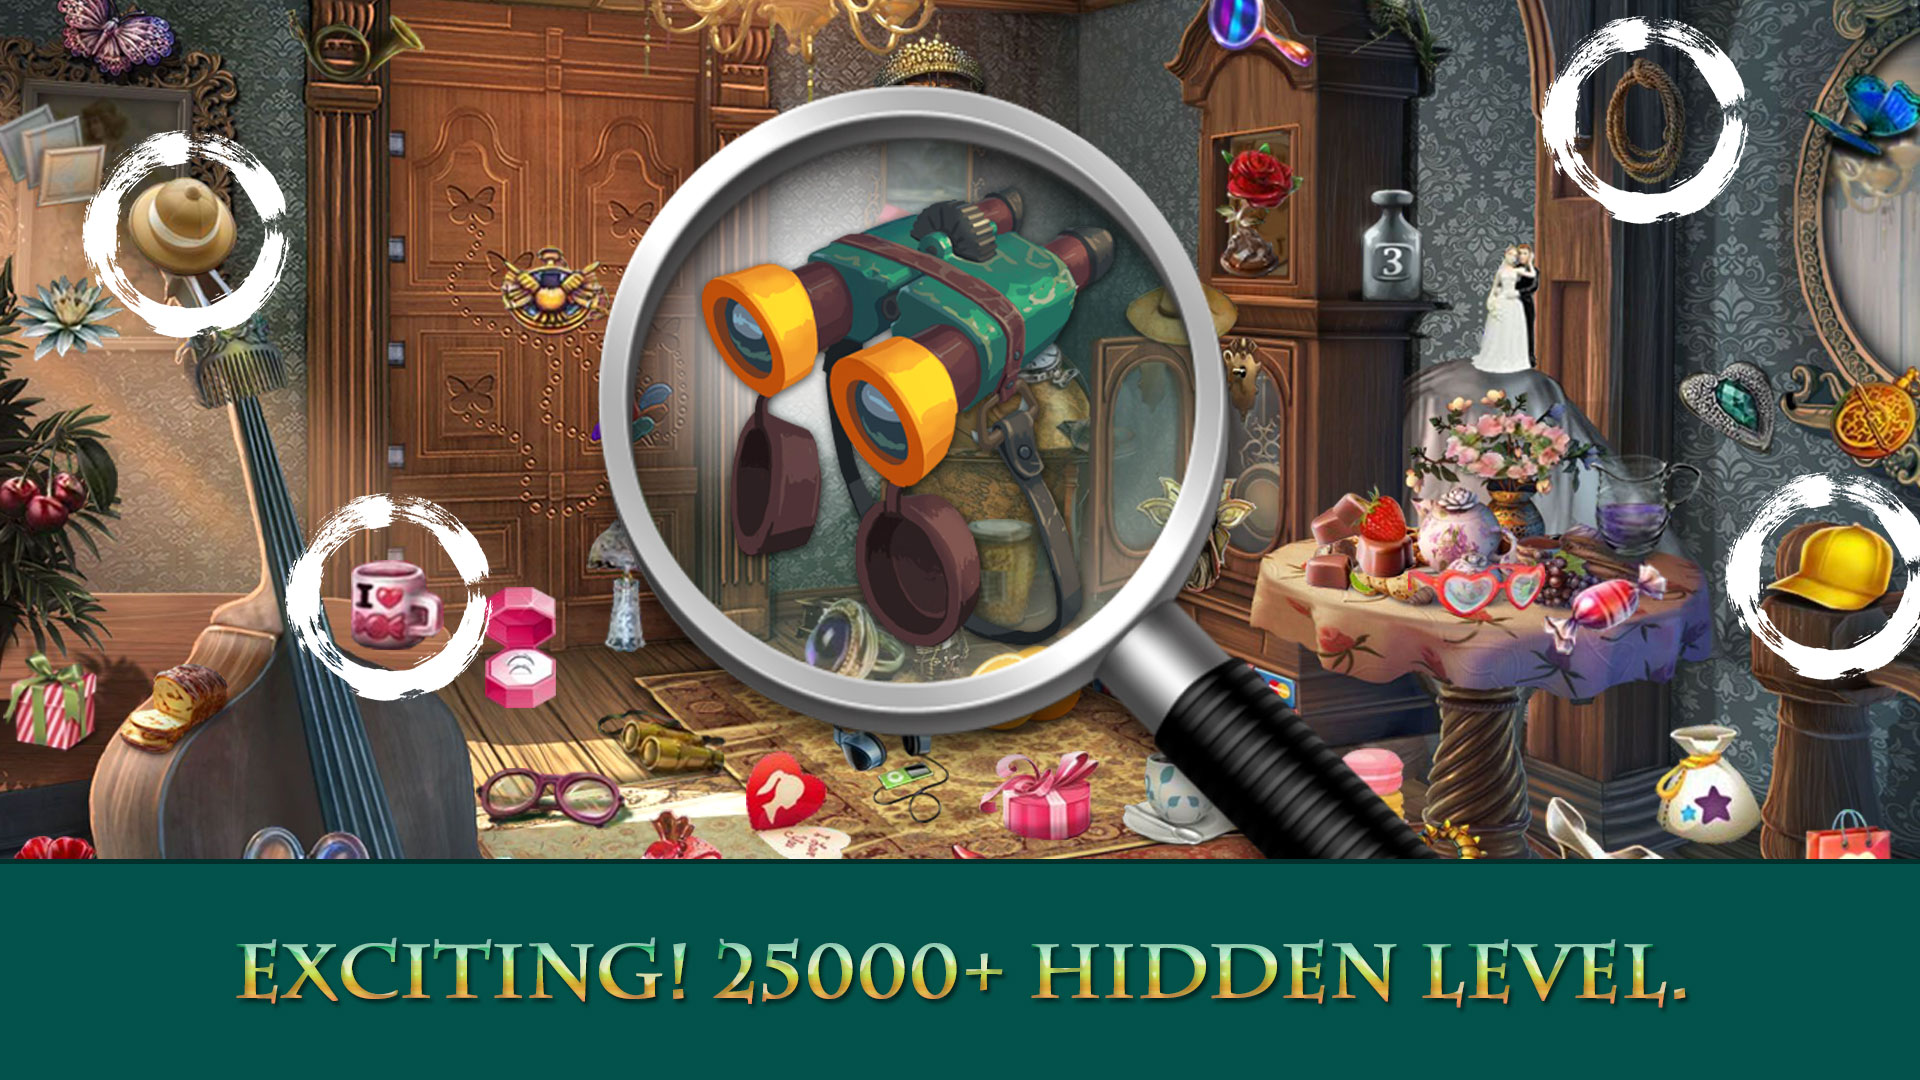 Suburban : Best Hidden Object Android Game